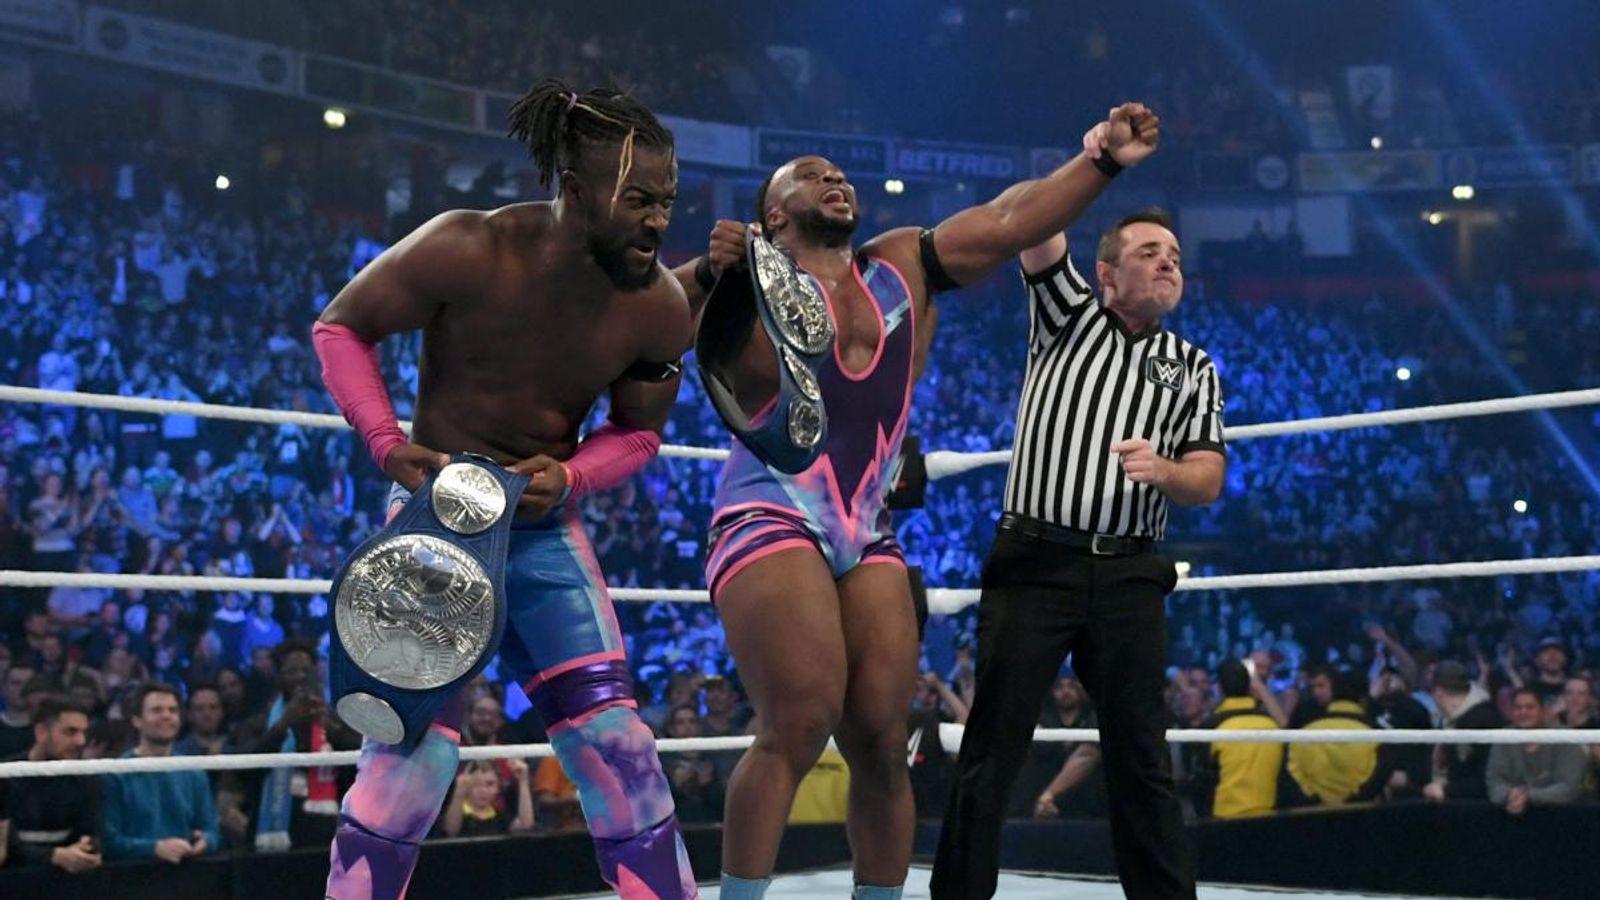 The Revival WWE tag Team Champion. WWE-New tag Team Champions-the New Day!. The New Day WWE tag Team Champion. WWE SMACKDOWN tag Team Championship. Wins day 2